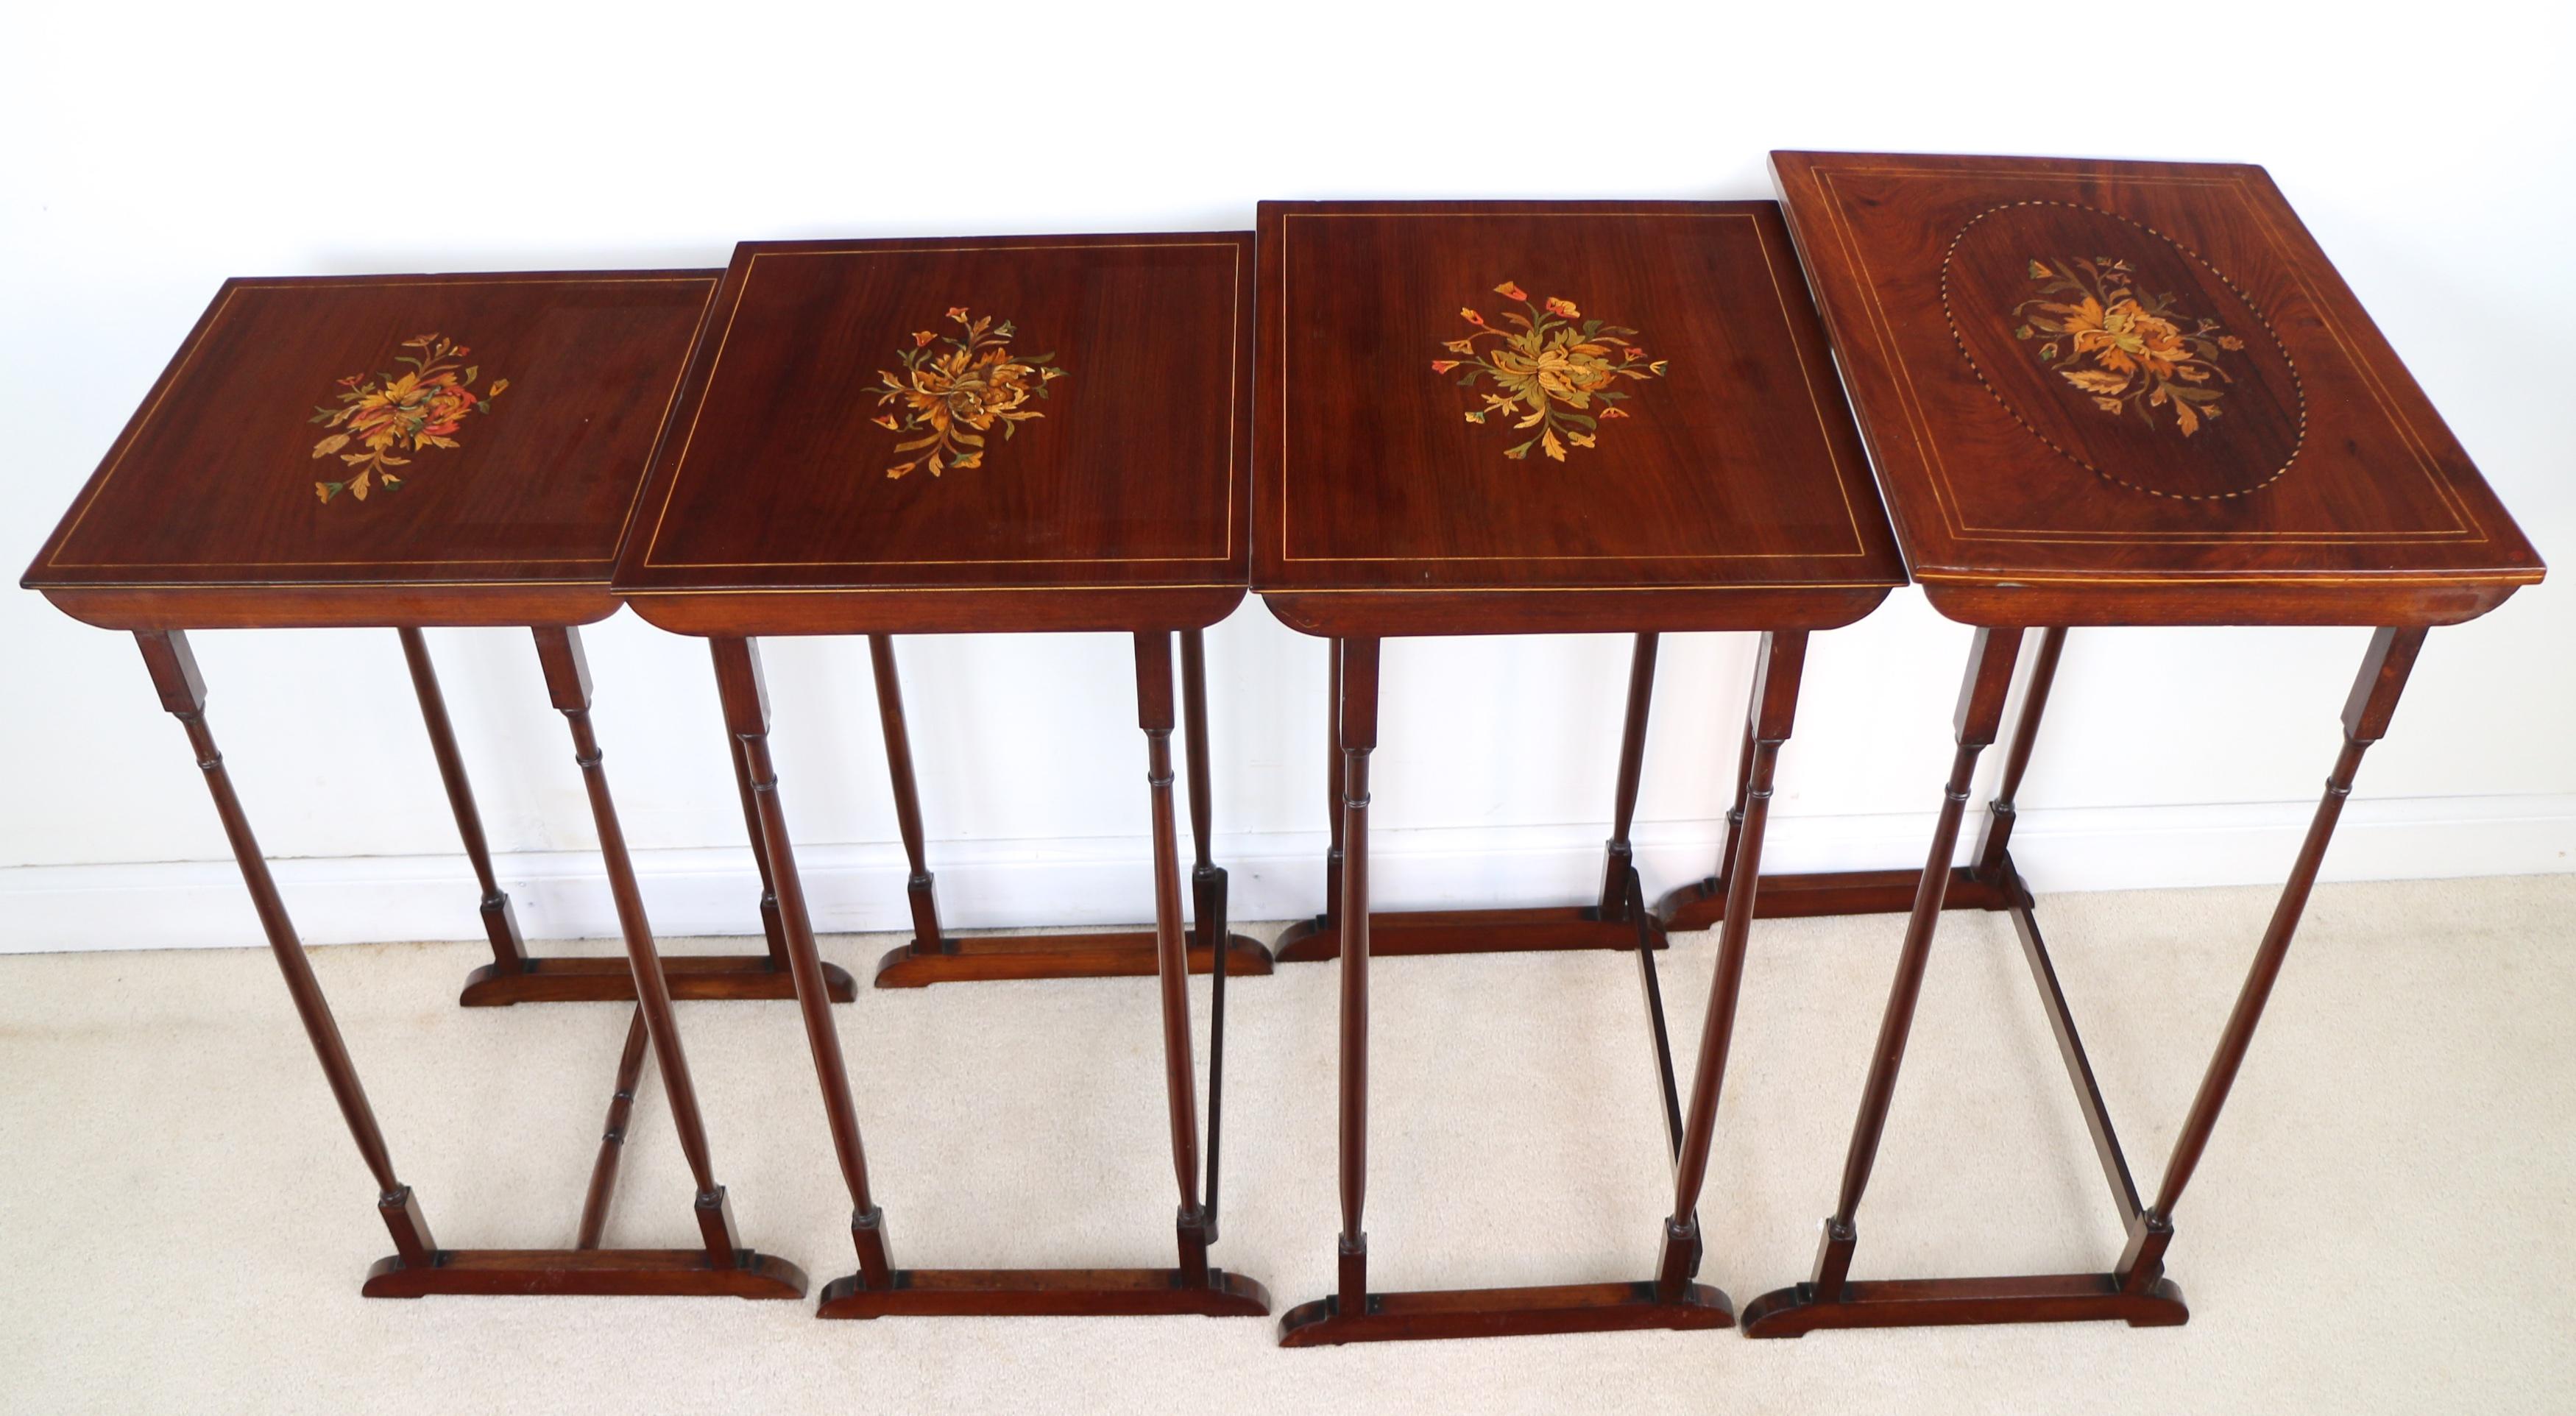 Set of Antique English Victorian Mahogany and Marquetry Inlaid Quartetto Tables For Sale 2